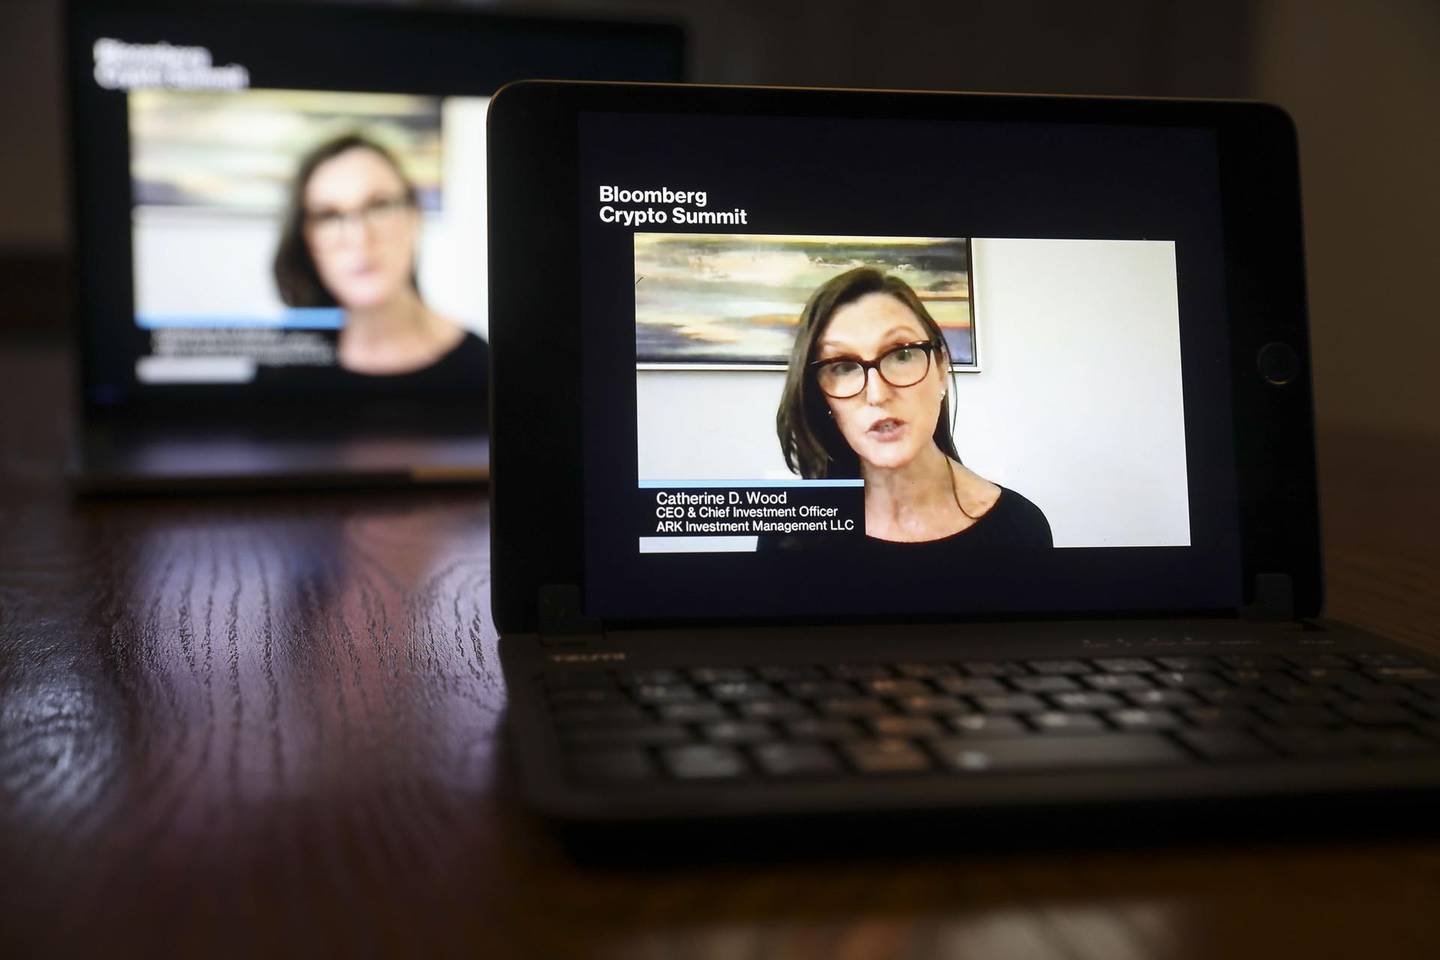 Catherine Wood, chief executive officer of ARK Investment Management LLC, speaks virtually during the Bloomberg Crypto Summit on a laptop computer in Tiskilwa, Illinois, U.S., on Thursday, Feb. 25, 2021. With Bitcoin reaching its all-time highs and interest in cryptocurrencies surging from major banks and asset managers, the future of digital assets has rarely seemed brighter. Photographer: Daniel Acker/Bloomberg